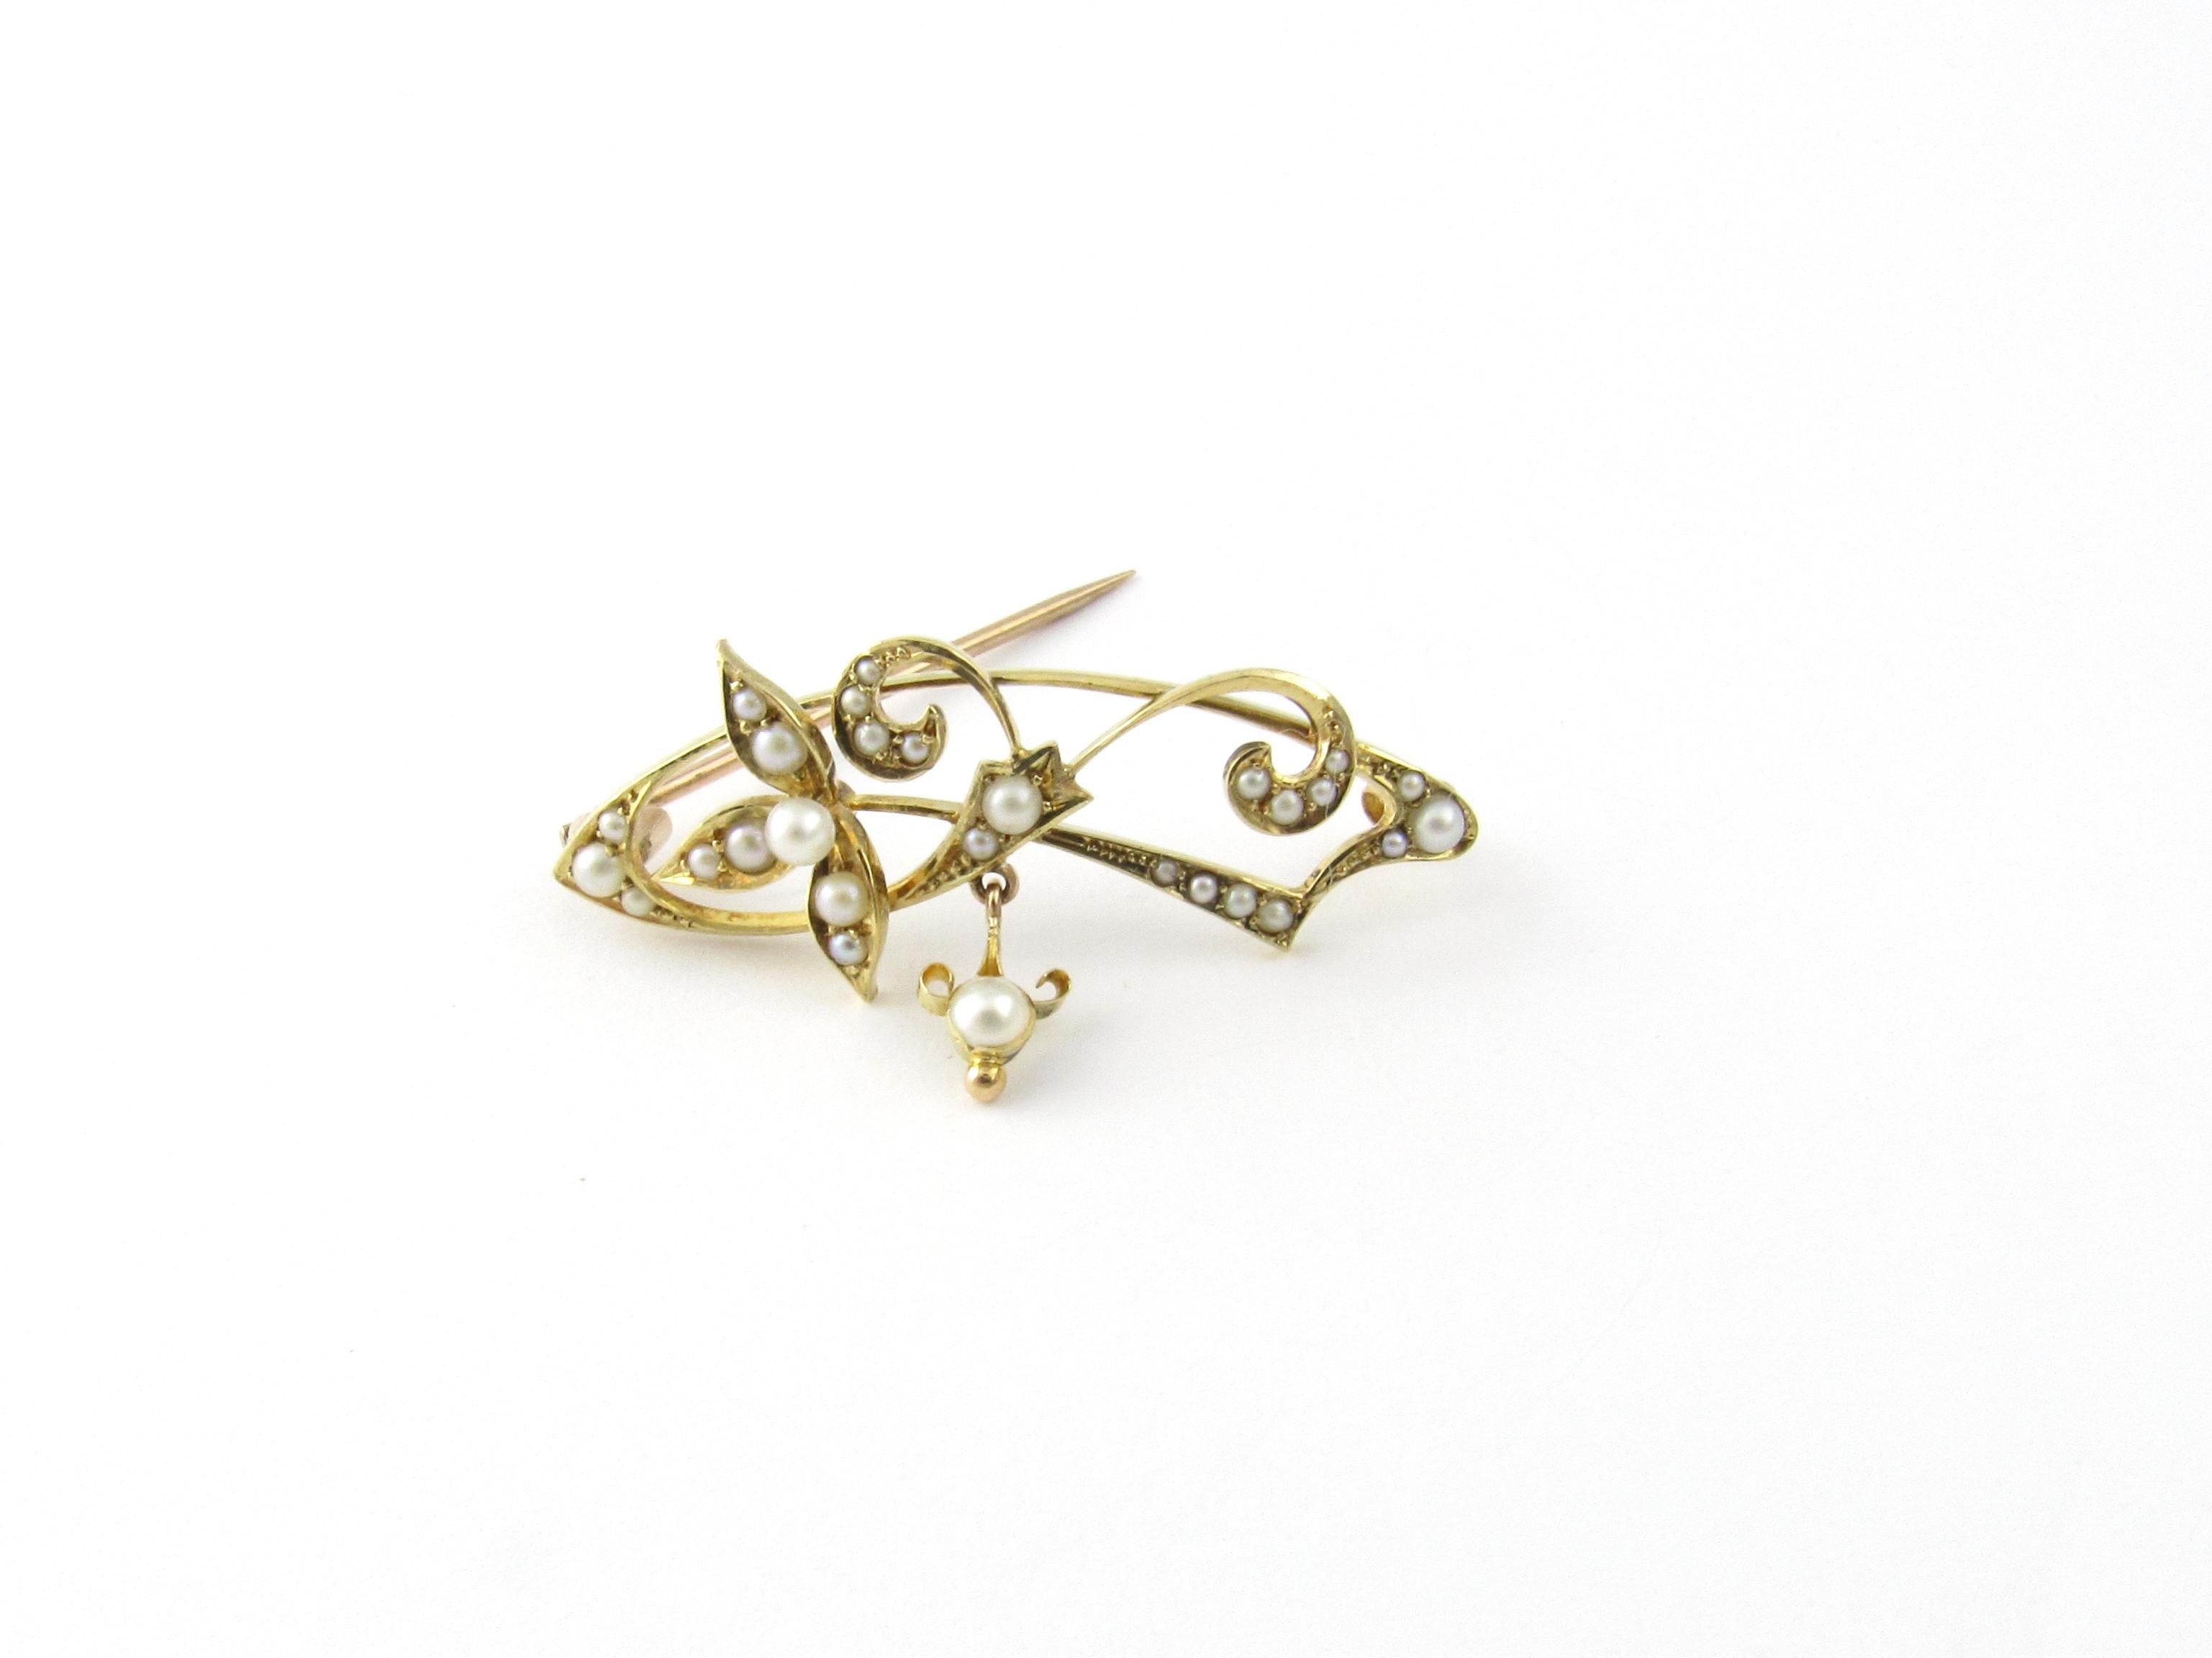 Round Cut 15 Karat Yellow Gold and Seed Pearl Brooch